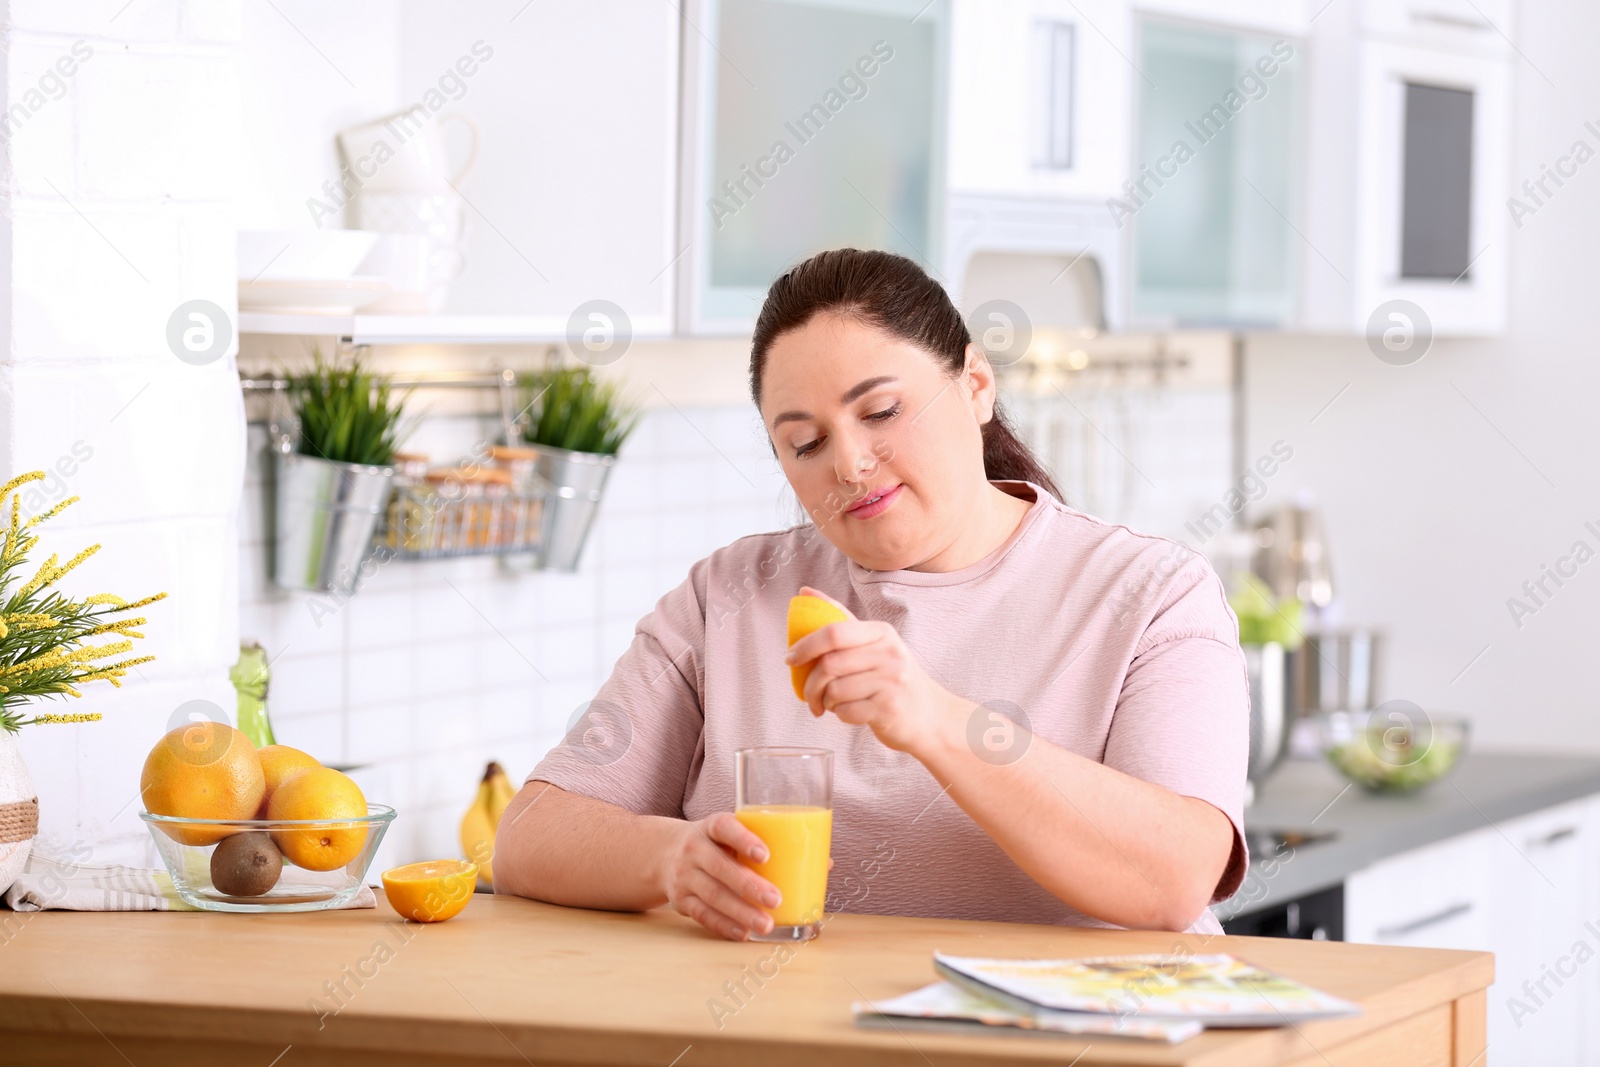 Photo of Overweight woman squeezing orange juice into glass at table in kitchen. Healthy diet